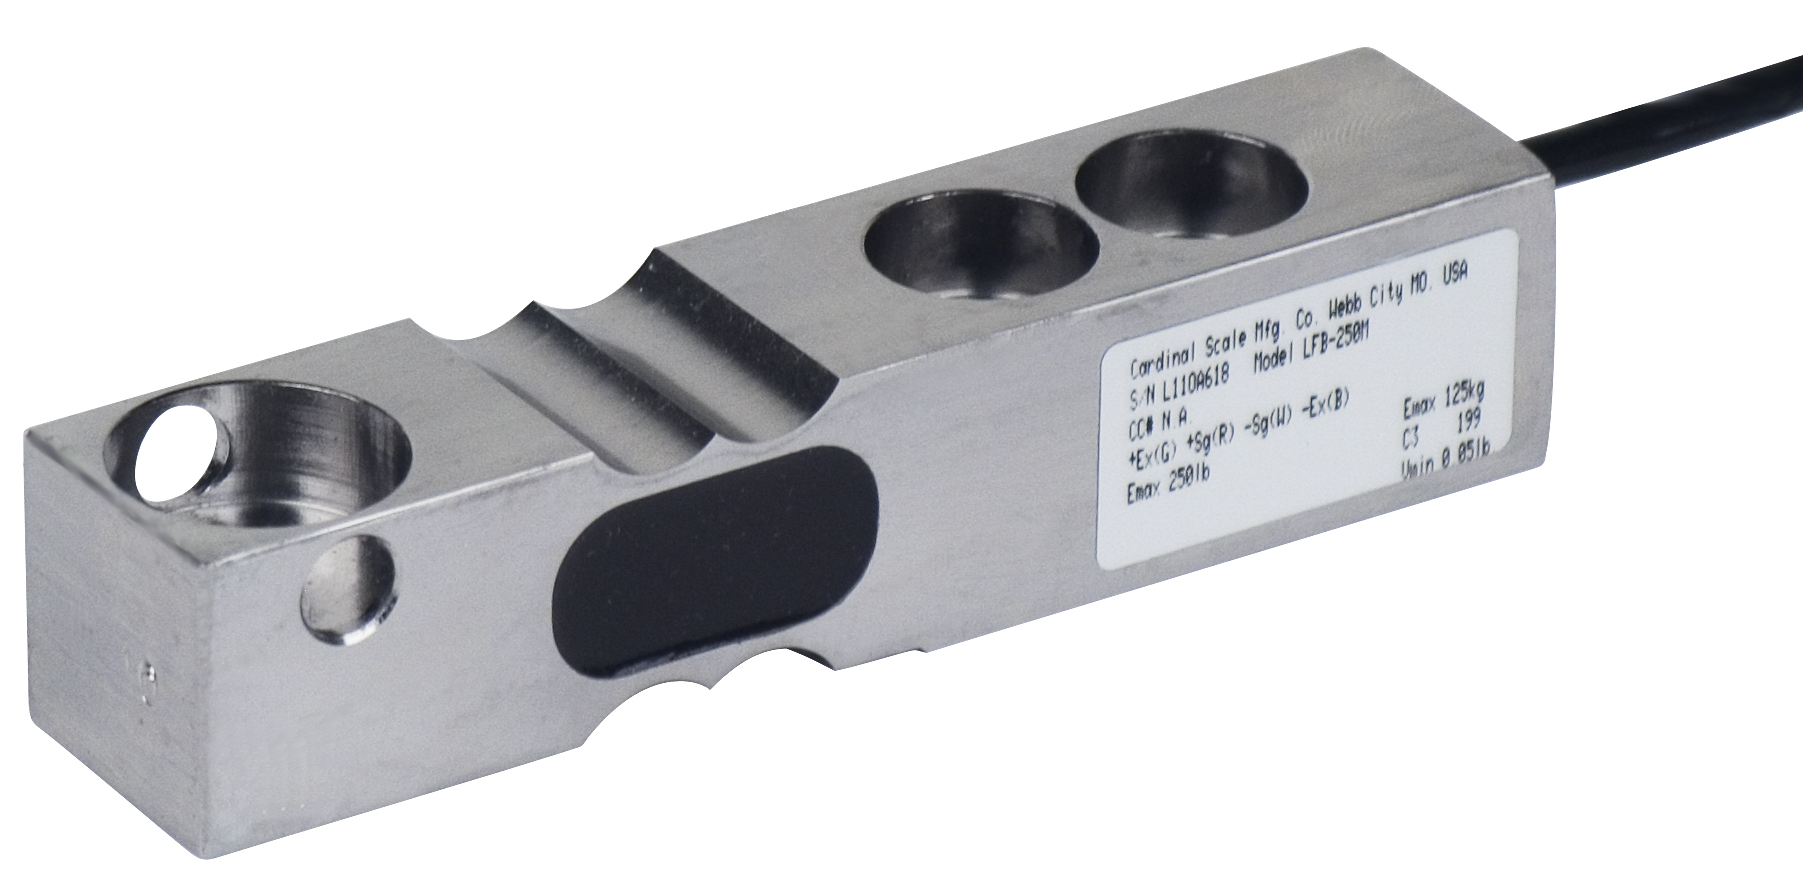 Brecknell H8H-C3-250kg 1 pc H8H 250KG Alloy Steel Shear Beam Load Cell 